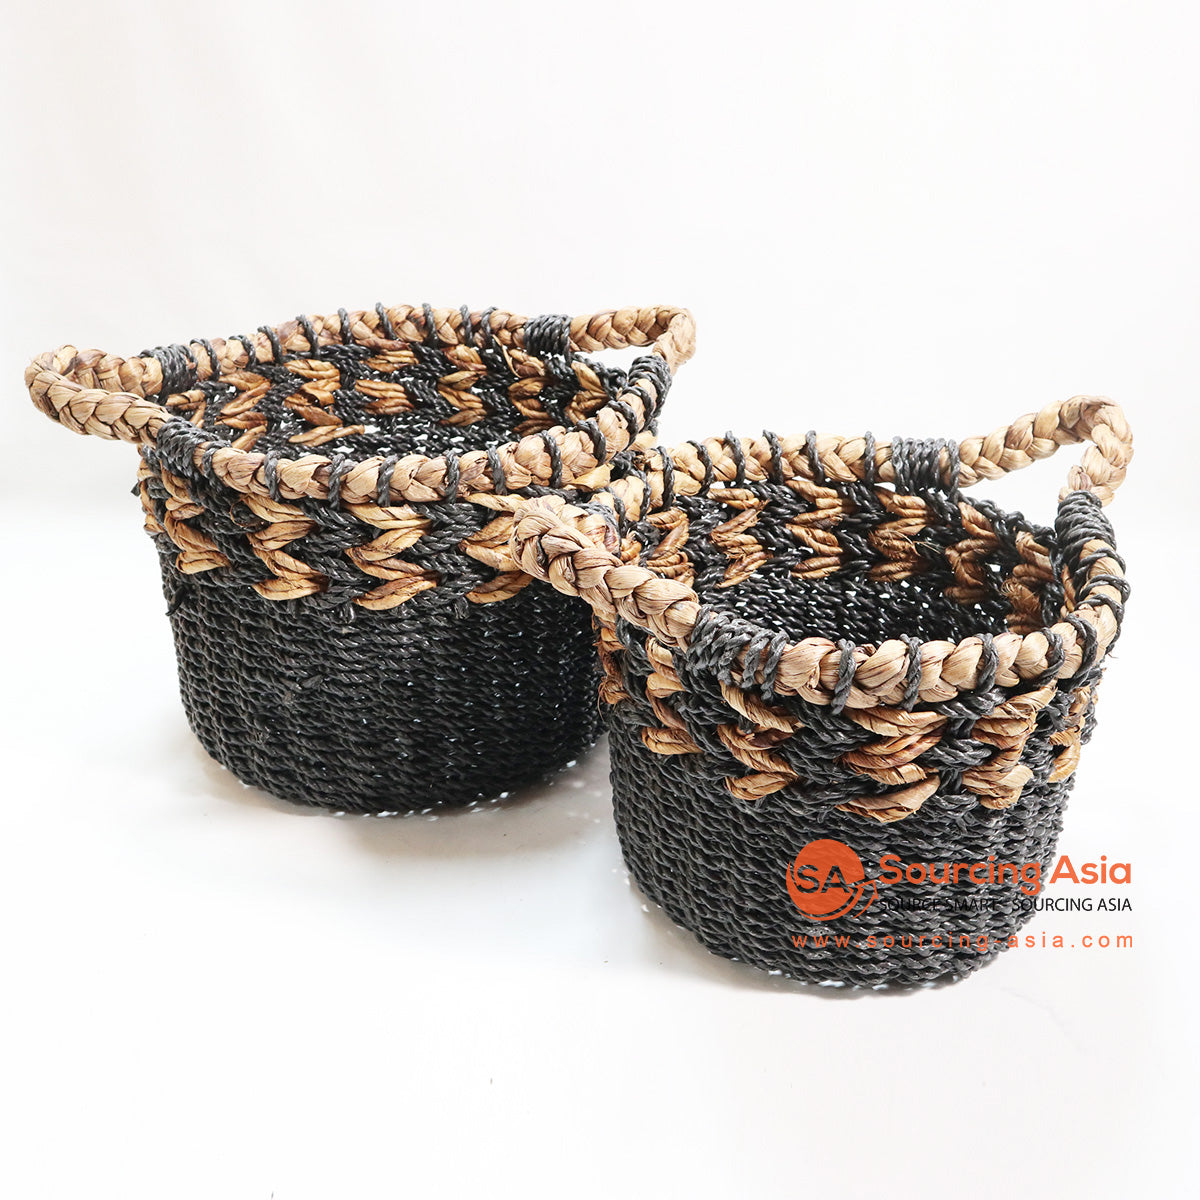 HBSC115-2 SET OF TWO BLACK SEAGRASS AND WATER HYACINTH BASKETS